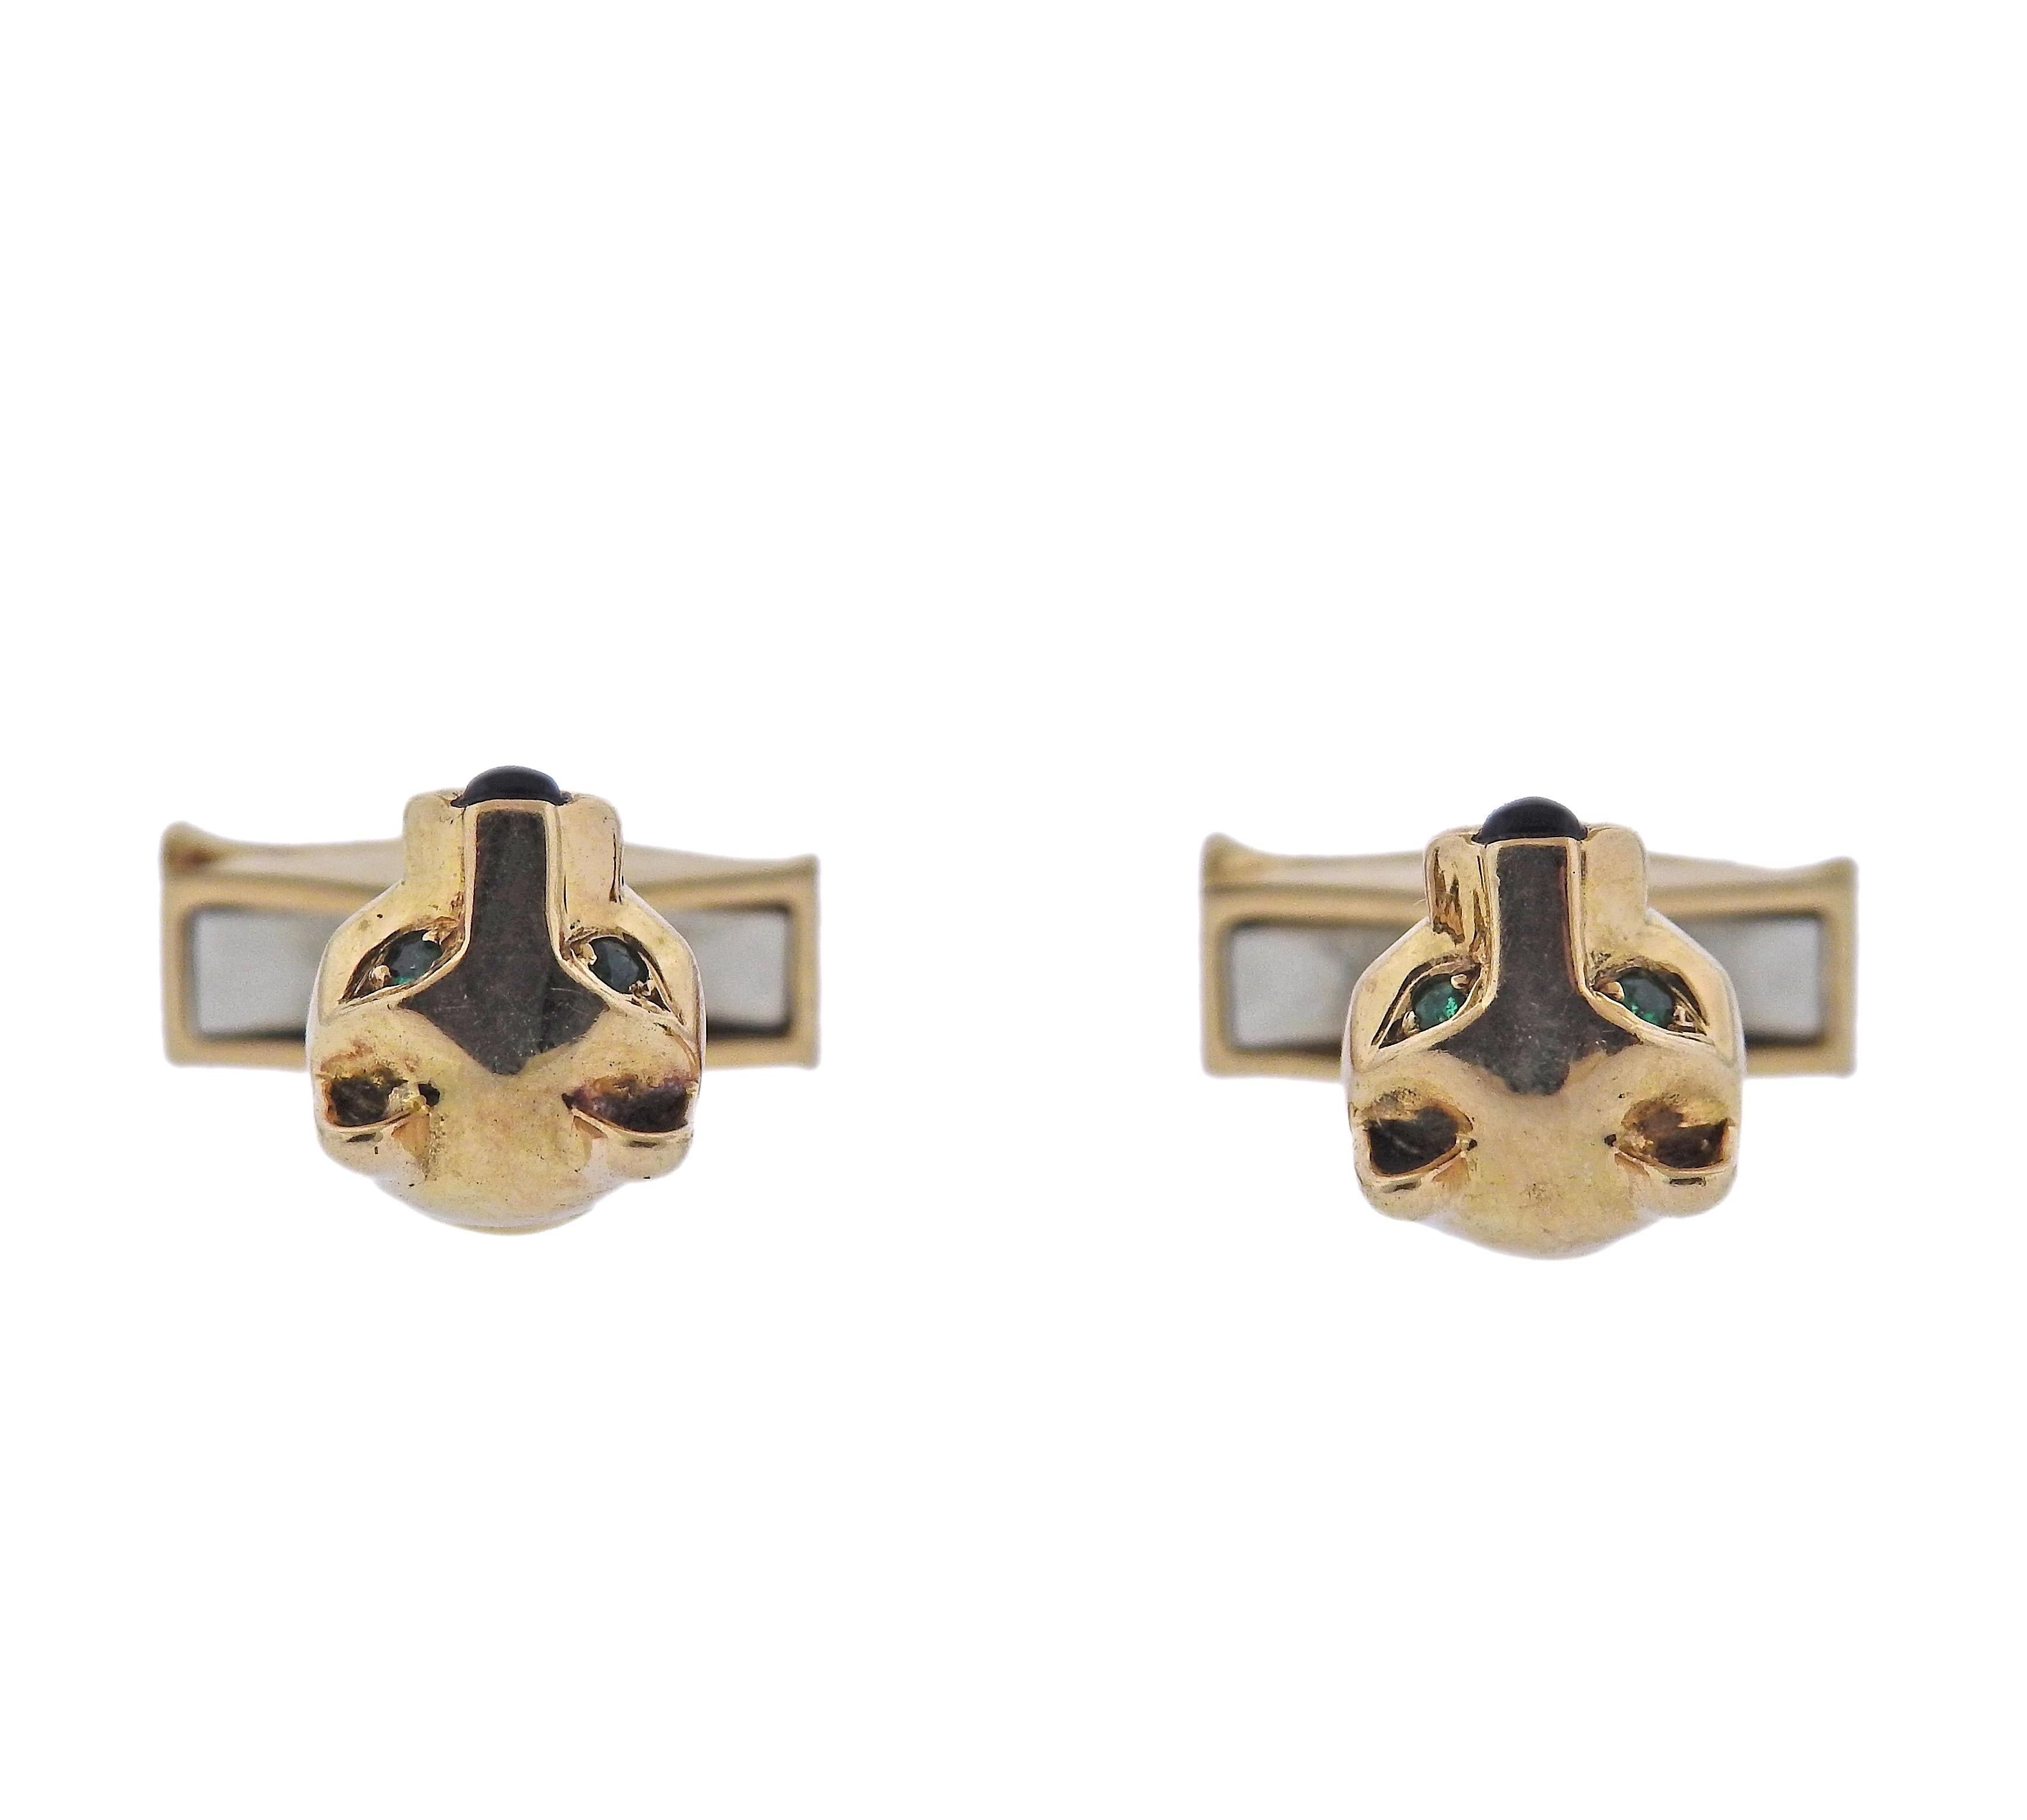 Pair of 18k gold Cartier Panthere cufflinks, with emerald eyes and onyx nose. Each head measures 11mm x 10mm. Marked: French marks, Cartier, 701678. Weight - 13 grams.